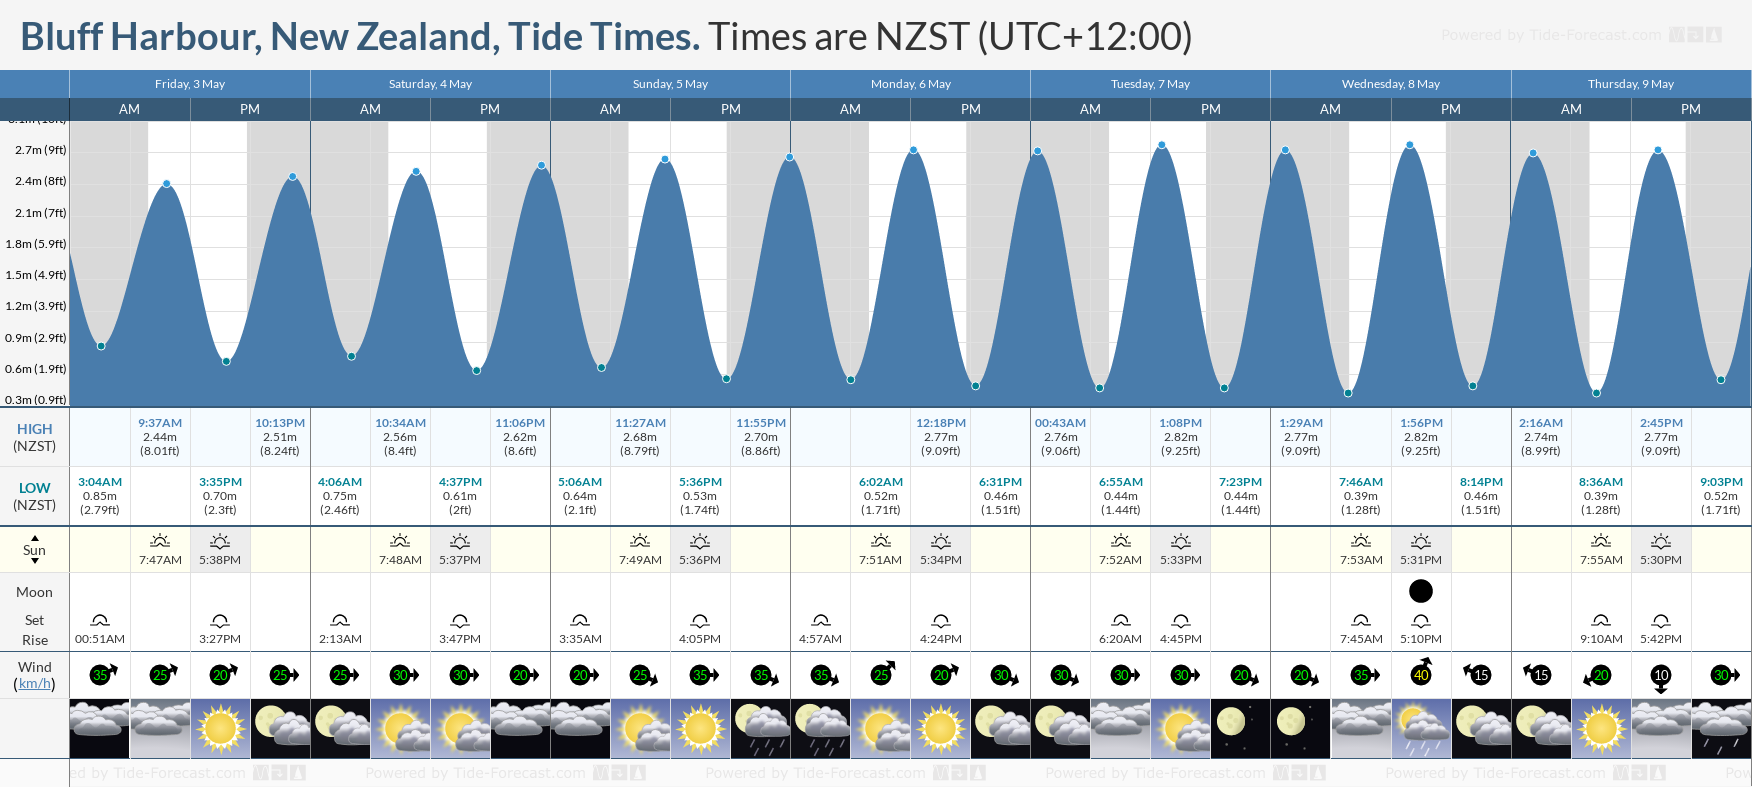 Bluff Harbour, New Zealand Tide Chart including high and low tide tide times for the next 7 days